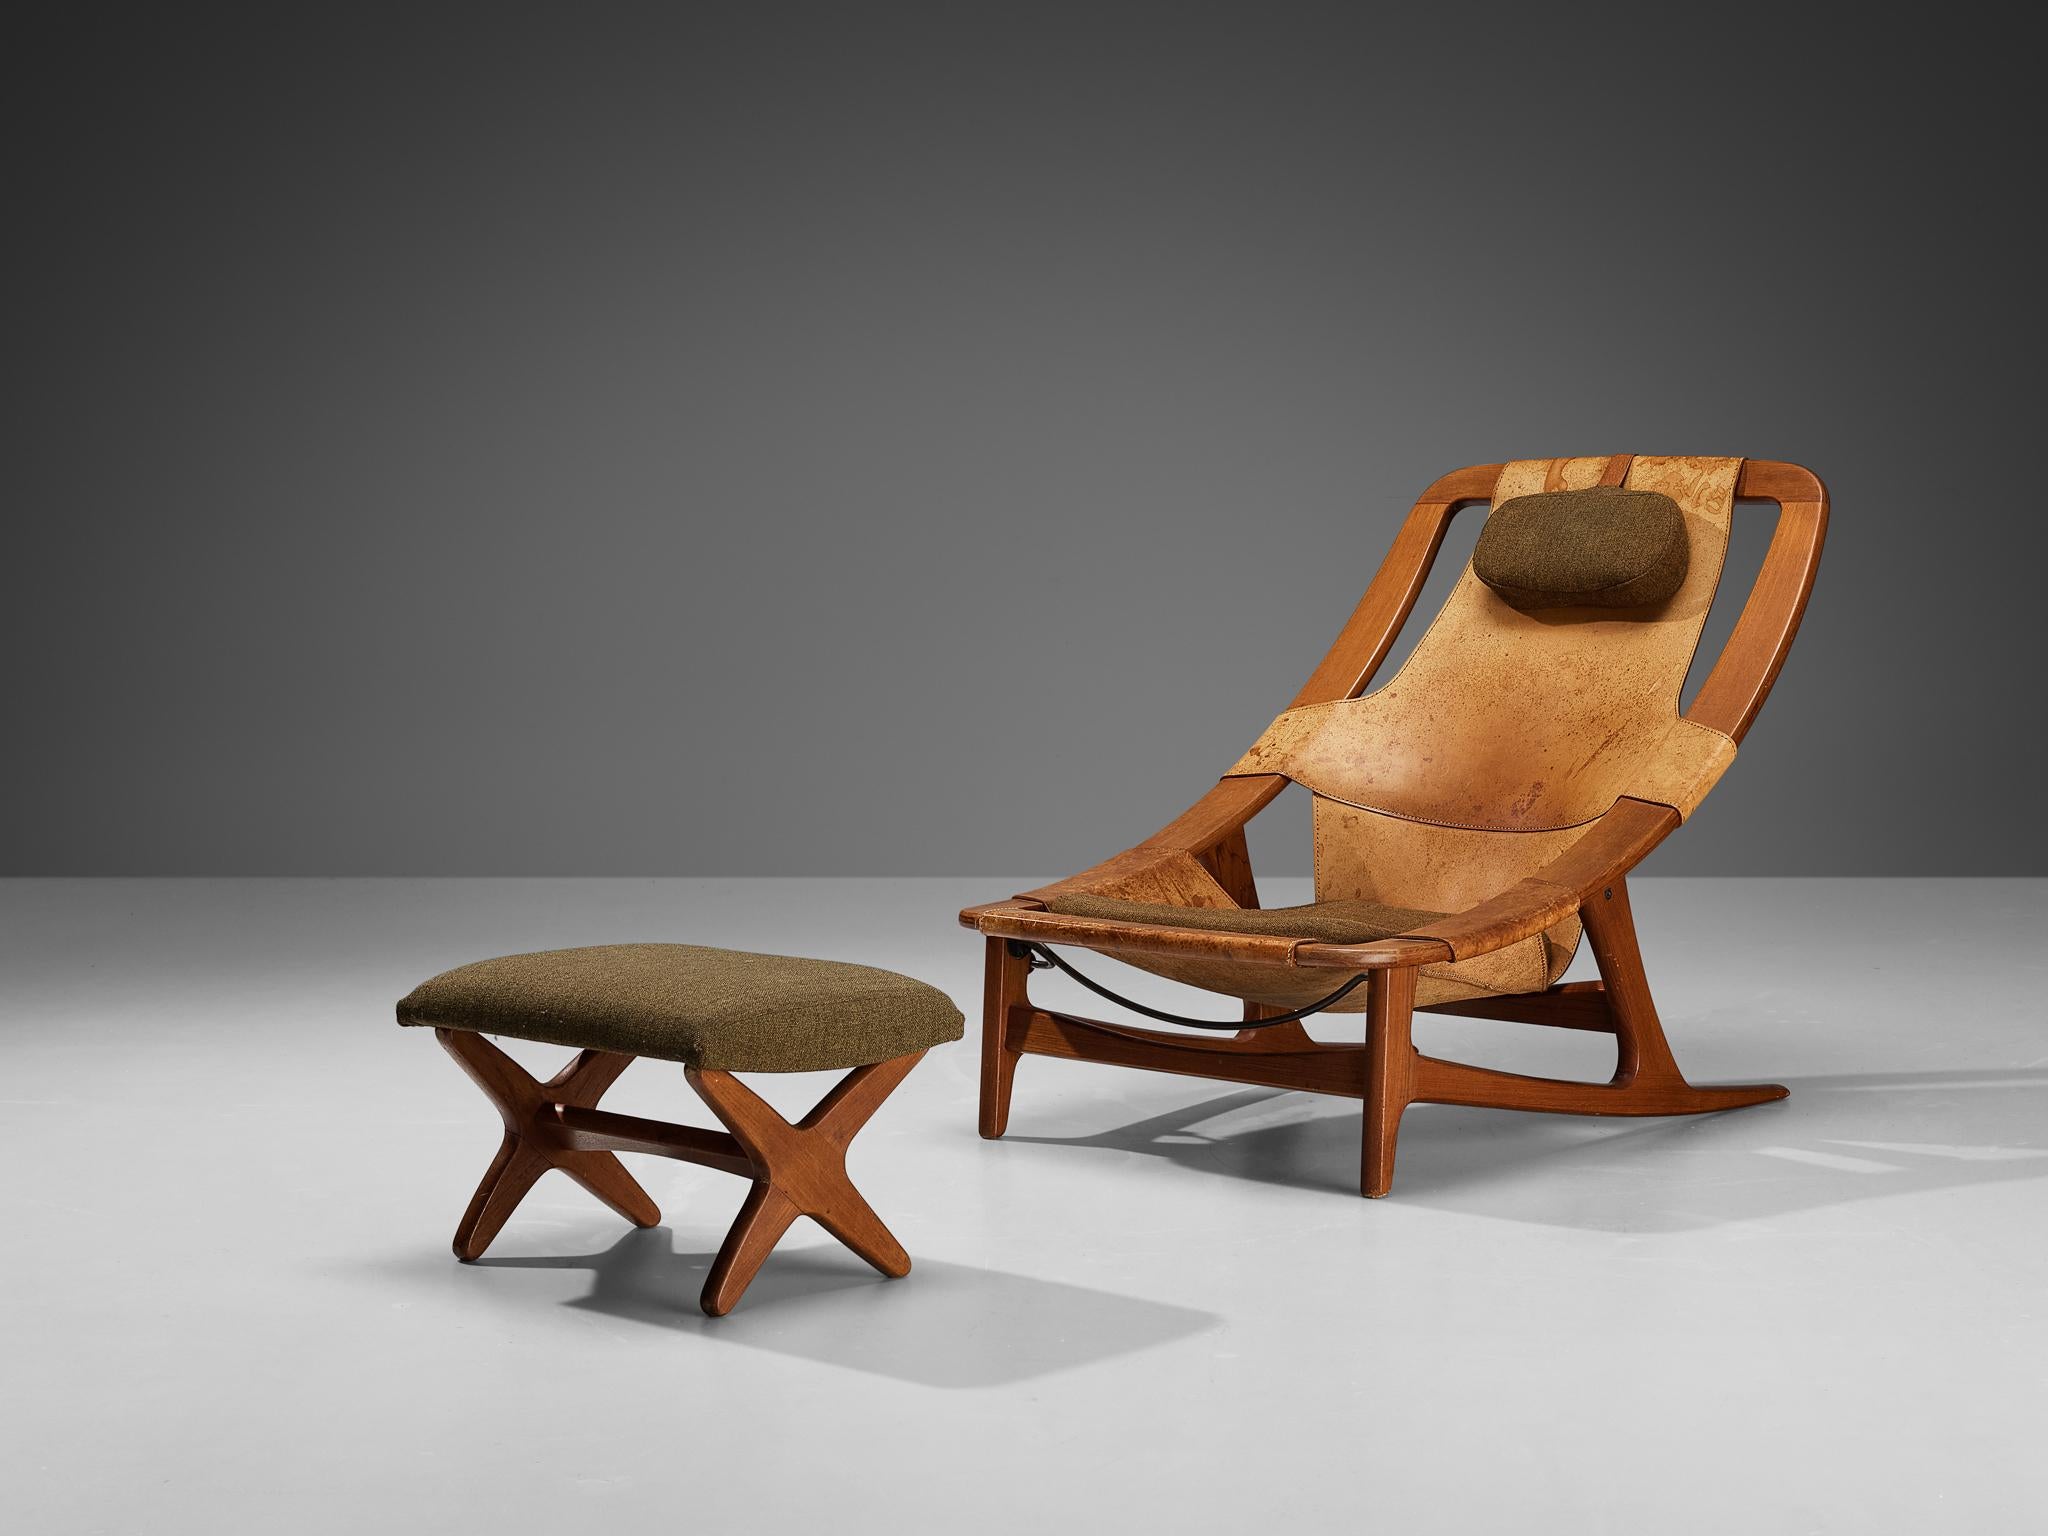 Arne F. Tidemand Ruud by A/S Inventar, Gjövik for Norcraft, 'Holmenkollen'/'3030' lounge chair with ottoman, leather, teak, brass, fabric, steel, Norway, 1959

This easy chair with ottoman is designed by Norwegian designer Arne F. Tidemand Ruud.